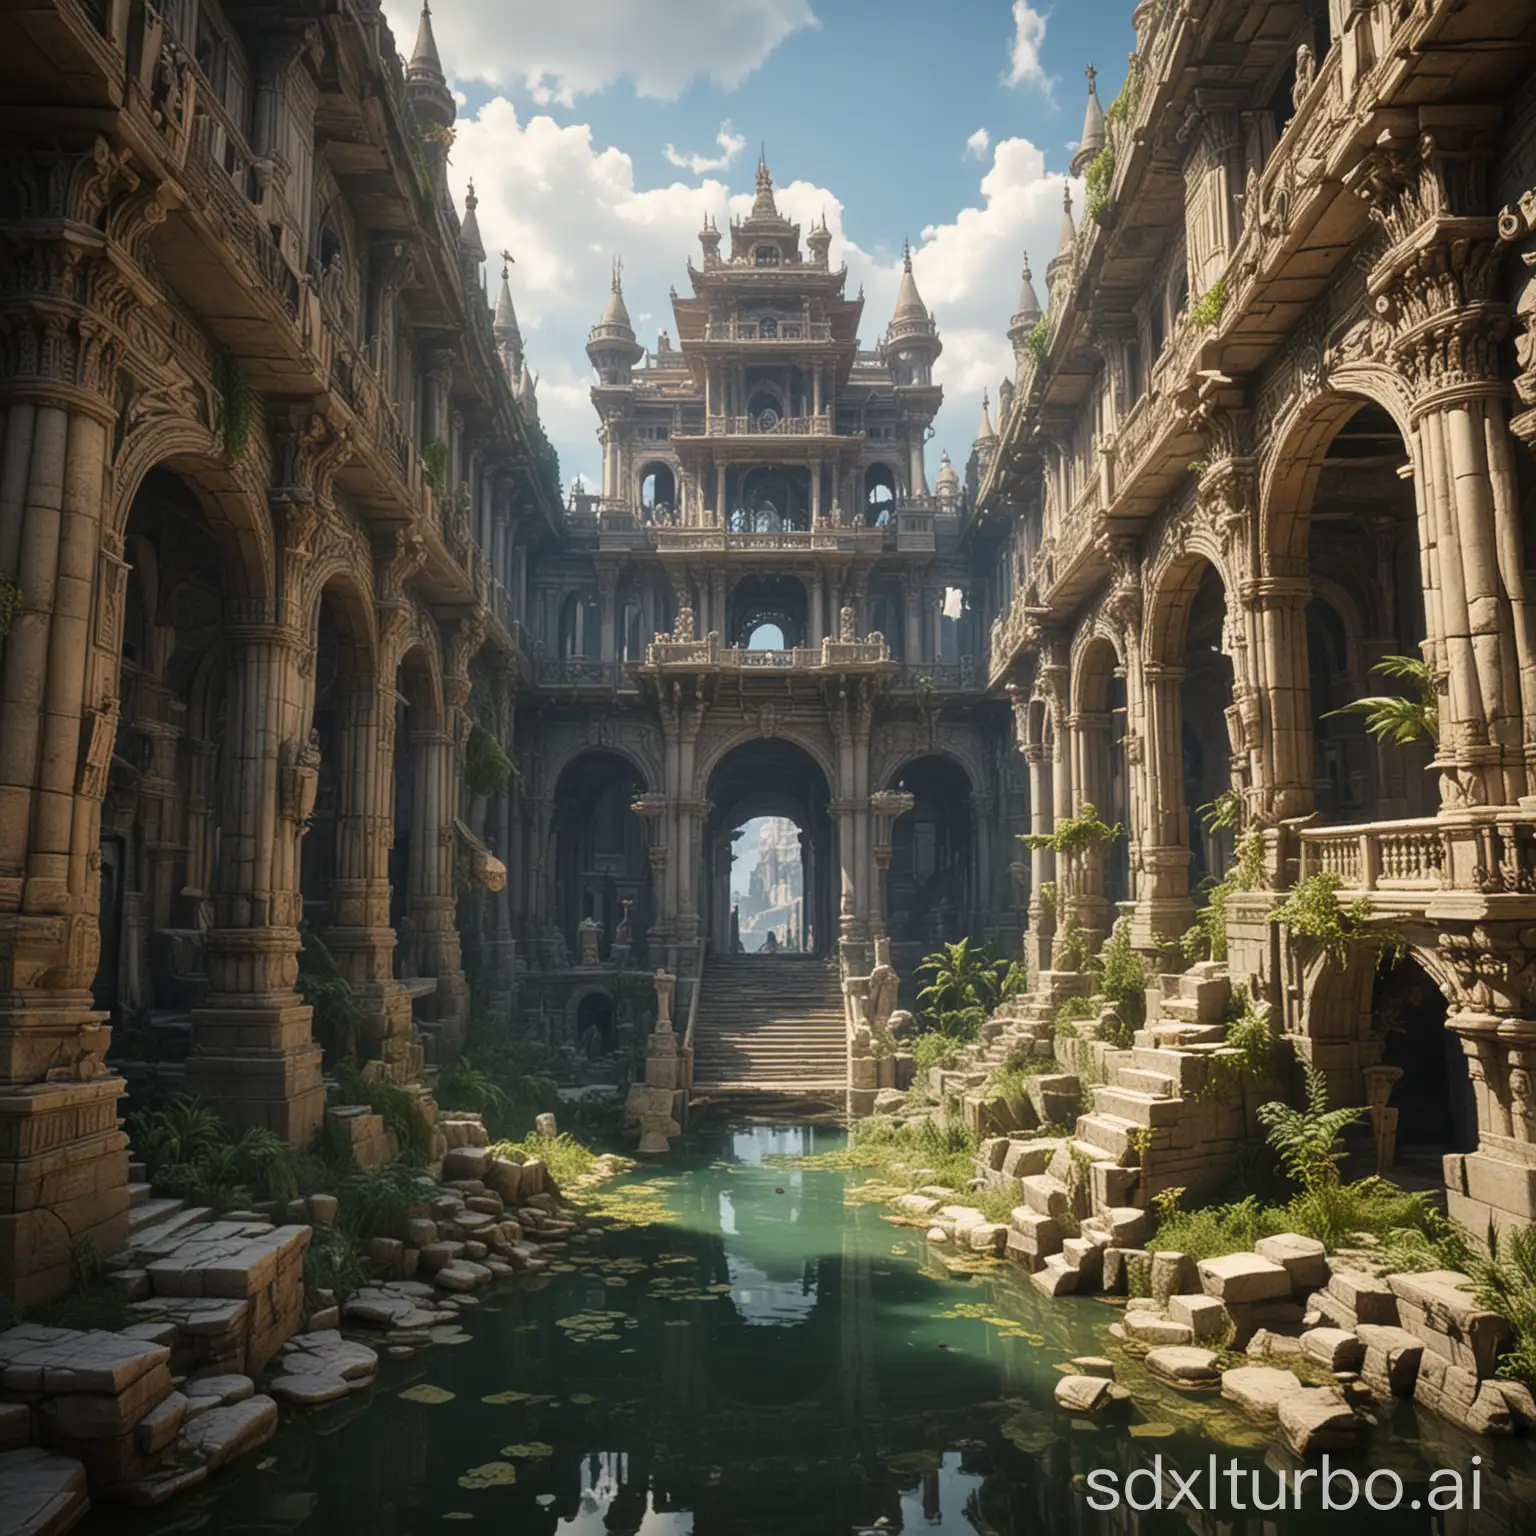 Mystical-Hidden-Palace-Zone-Enigmatic-Ruins-Amidst-Lush-Greenery